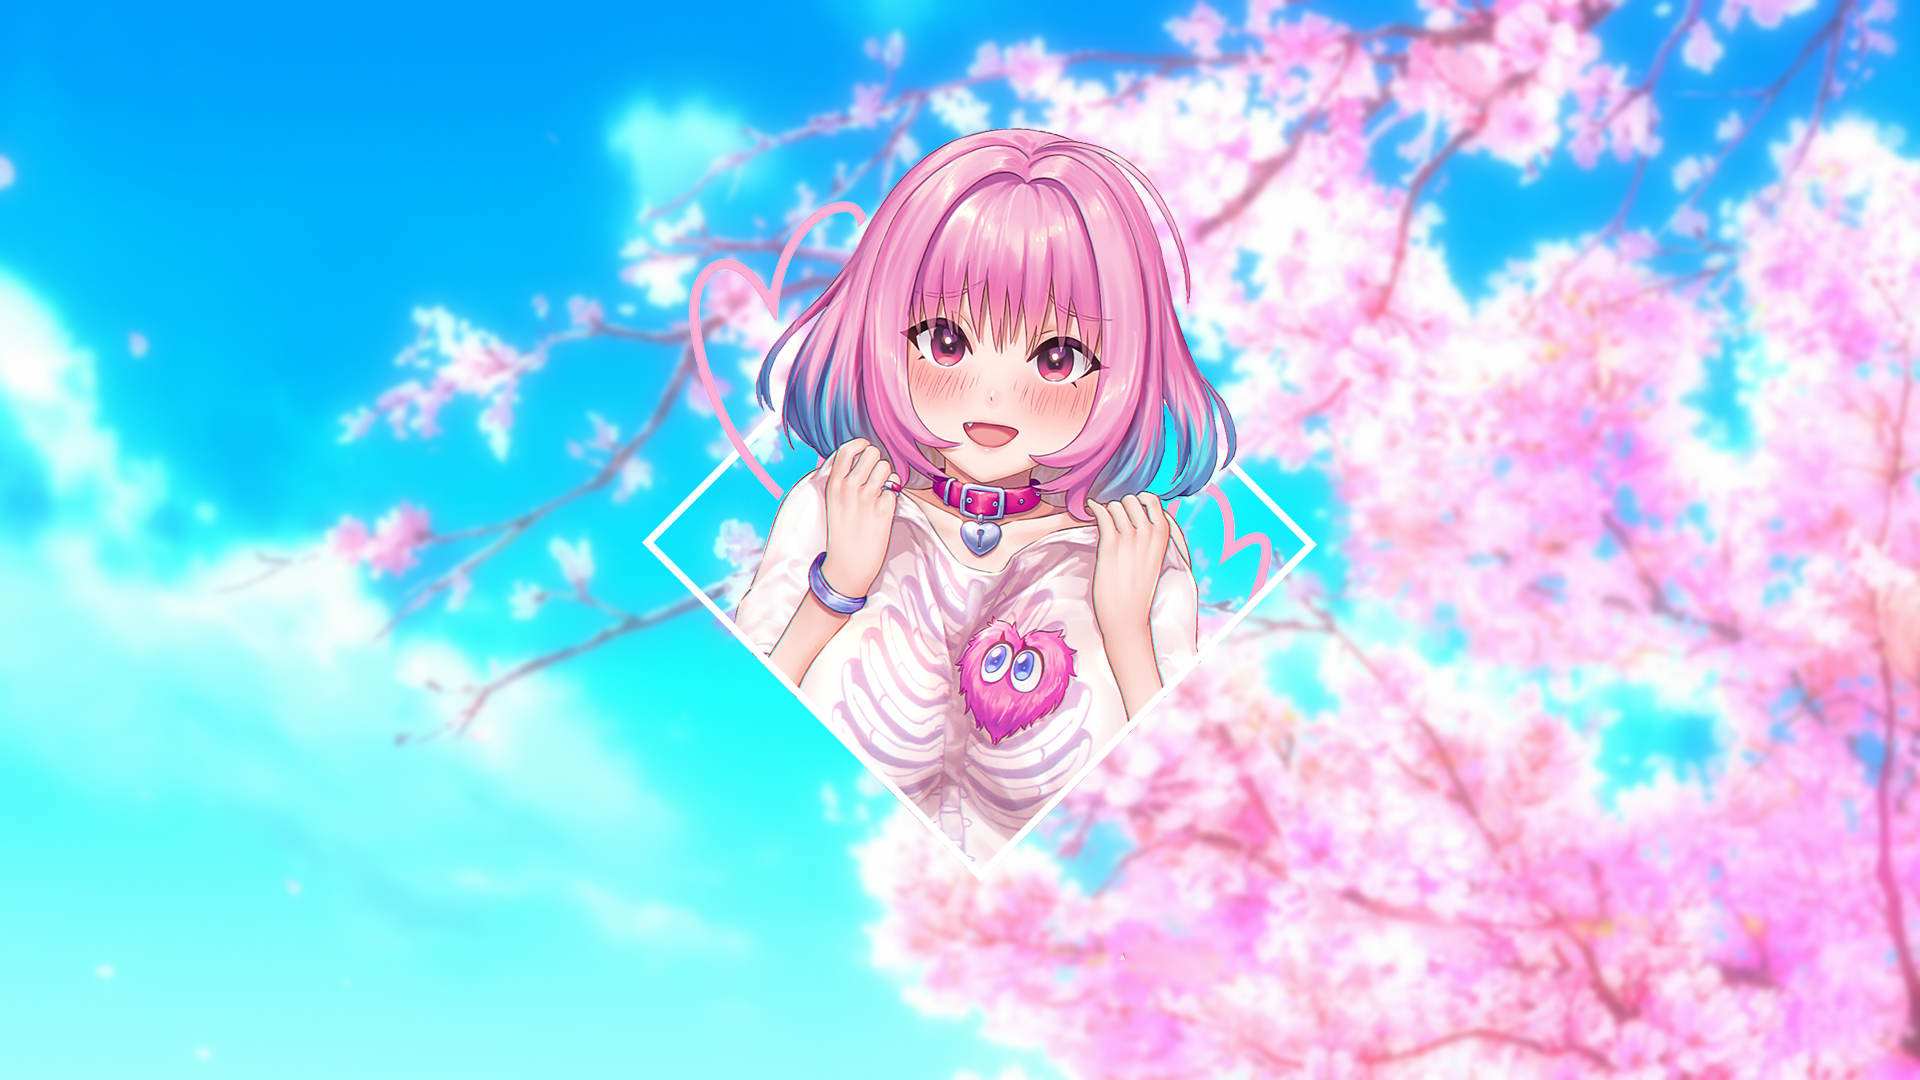 Pink Hair, Anime, Render In Shapes, Anime Girls, Cherry Blossom, Necklace, Picture In Picture, Riamu Yumemi, THE IDOLM Cinderella Girlsx1080 Wallpaper